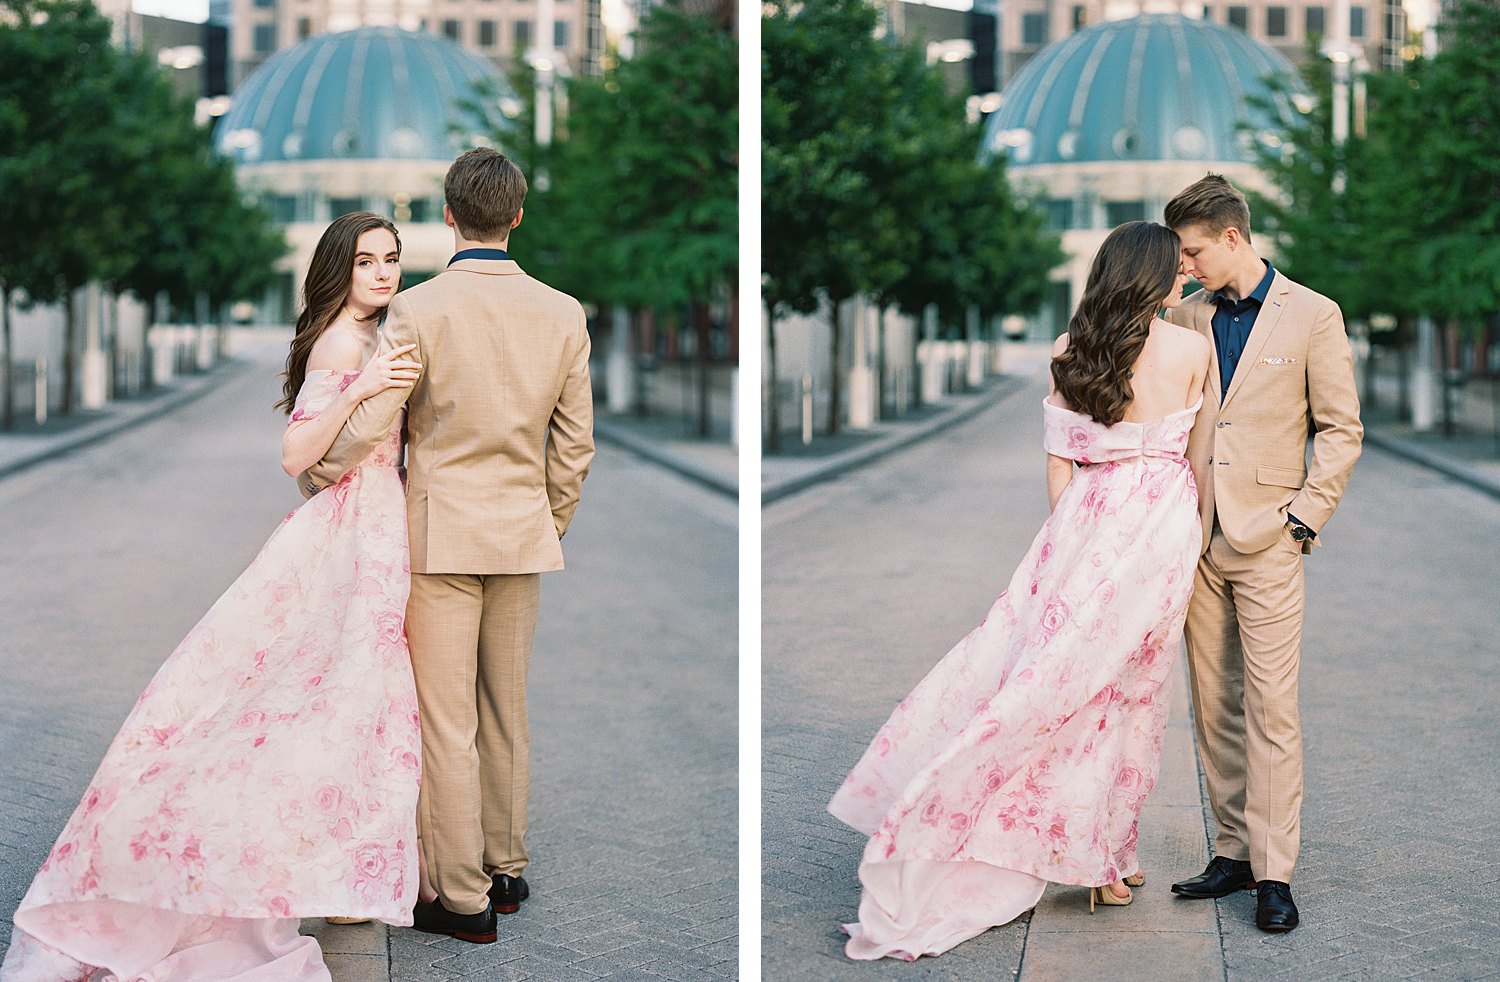 woman in Pink floral gown holding with man in tan suite downtown Dallas street